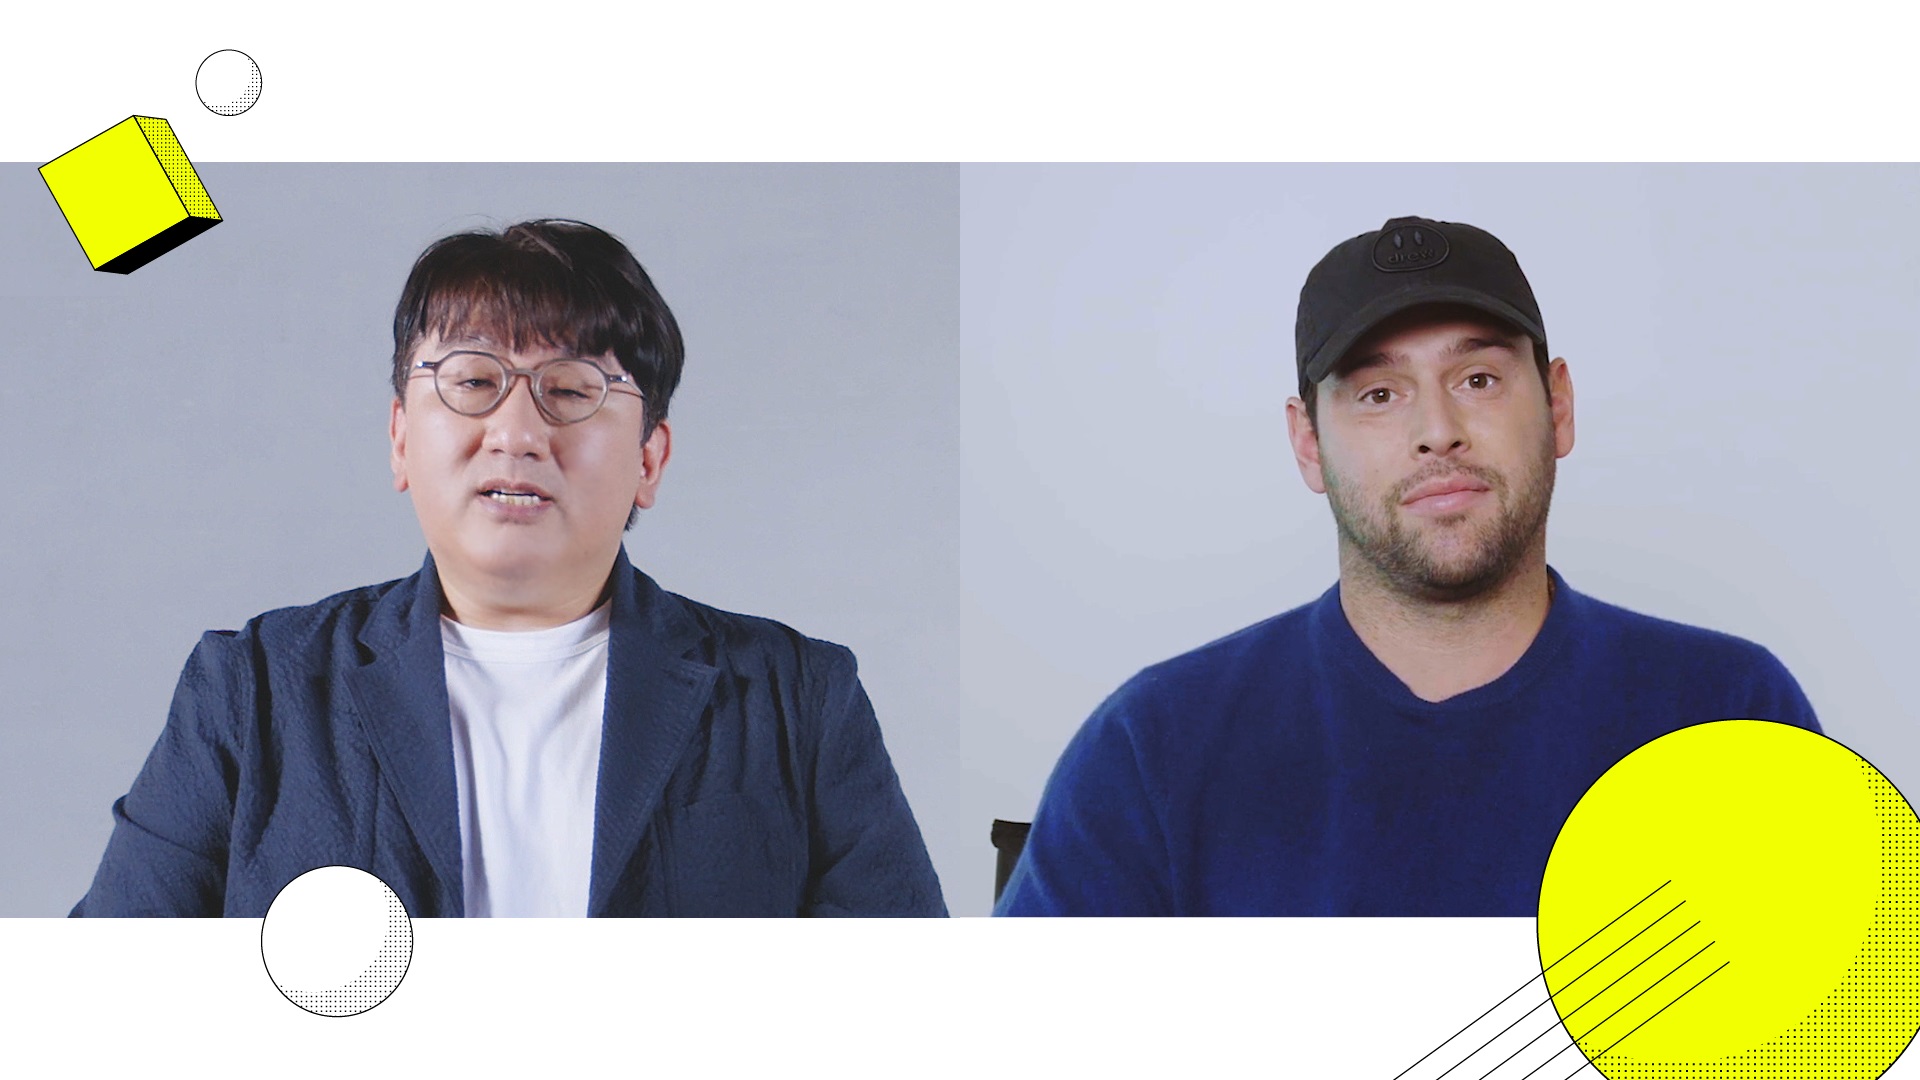 Bang Si-Hyuk and Scooter Braun during 2021 HYBE Briefing with the Community